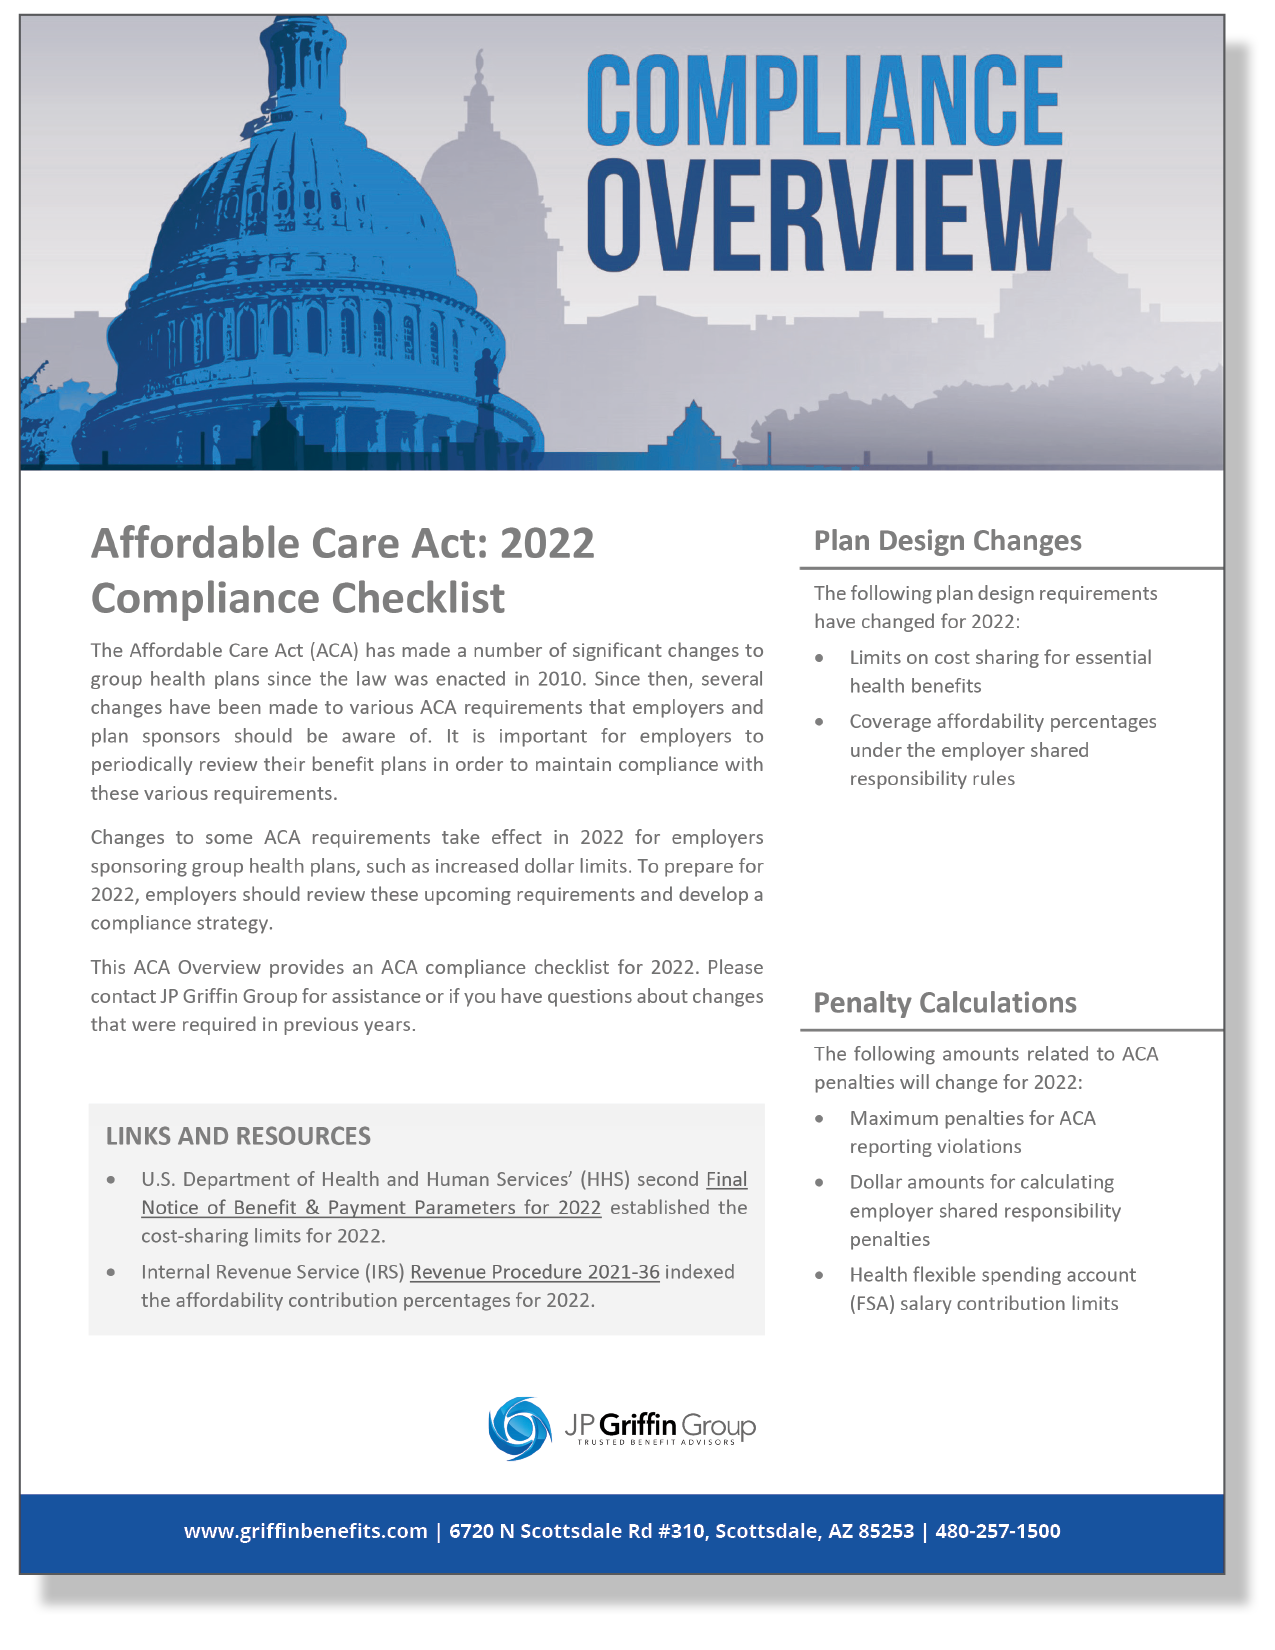 Affordable Care Act 2022 Compliance Checklist 10.15